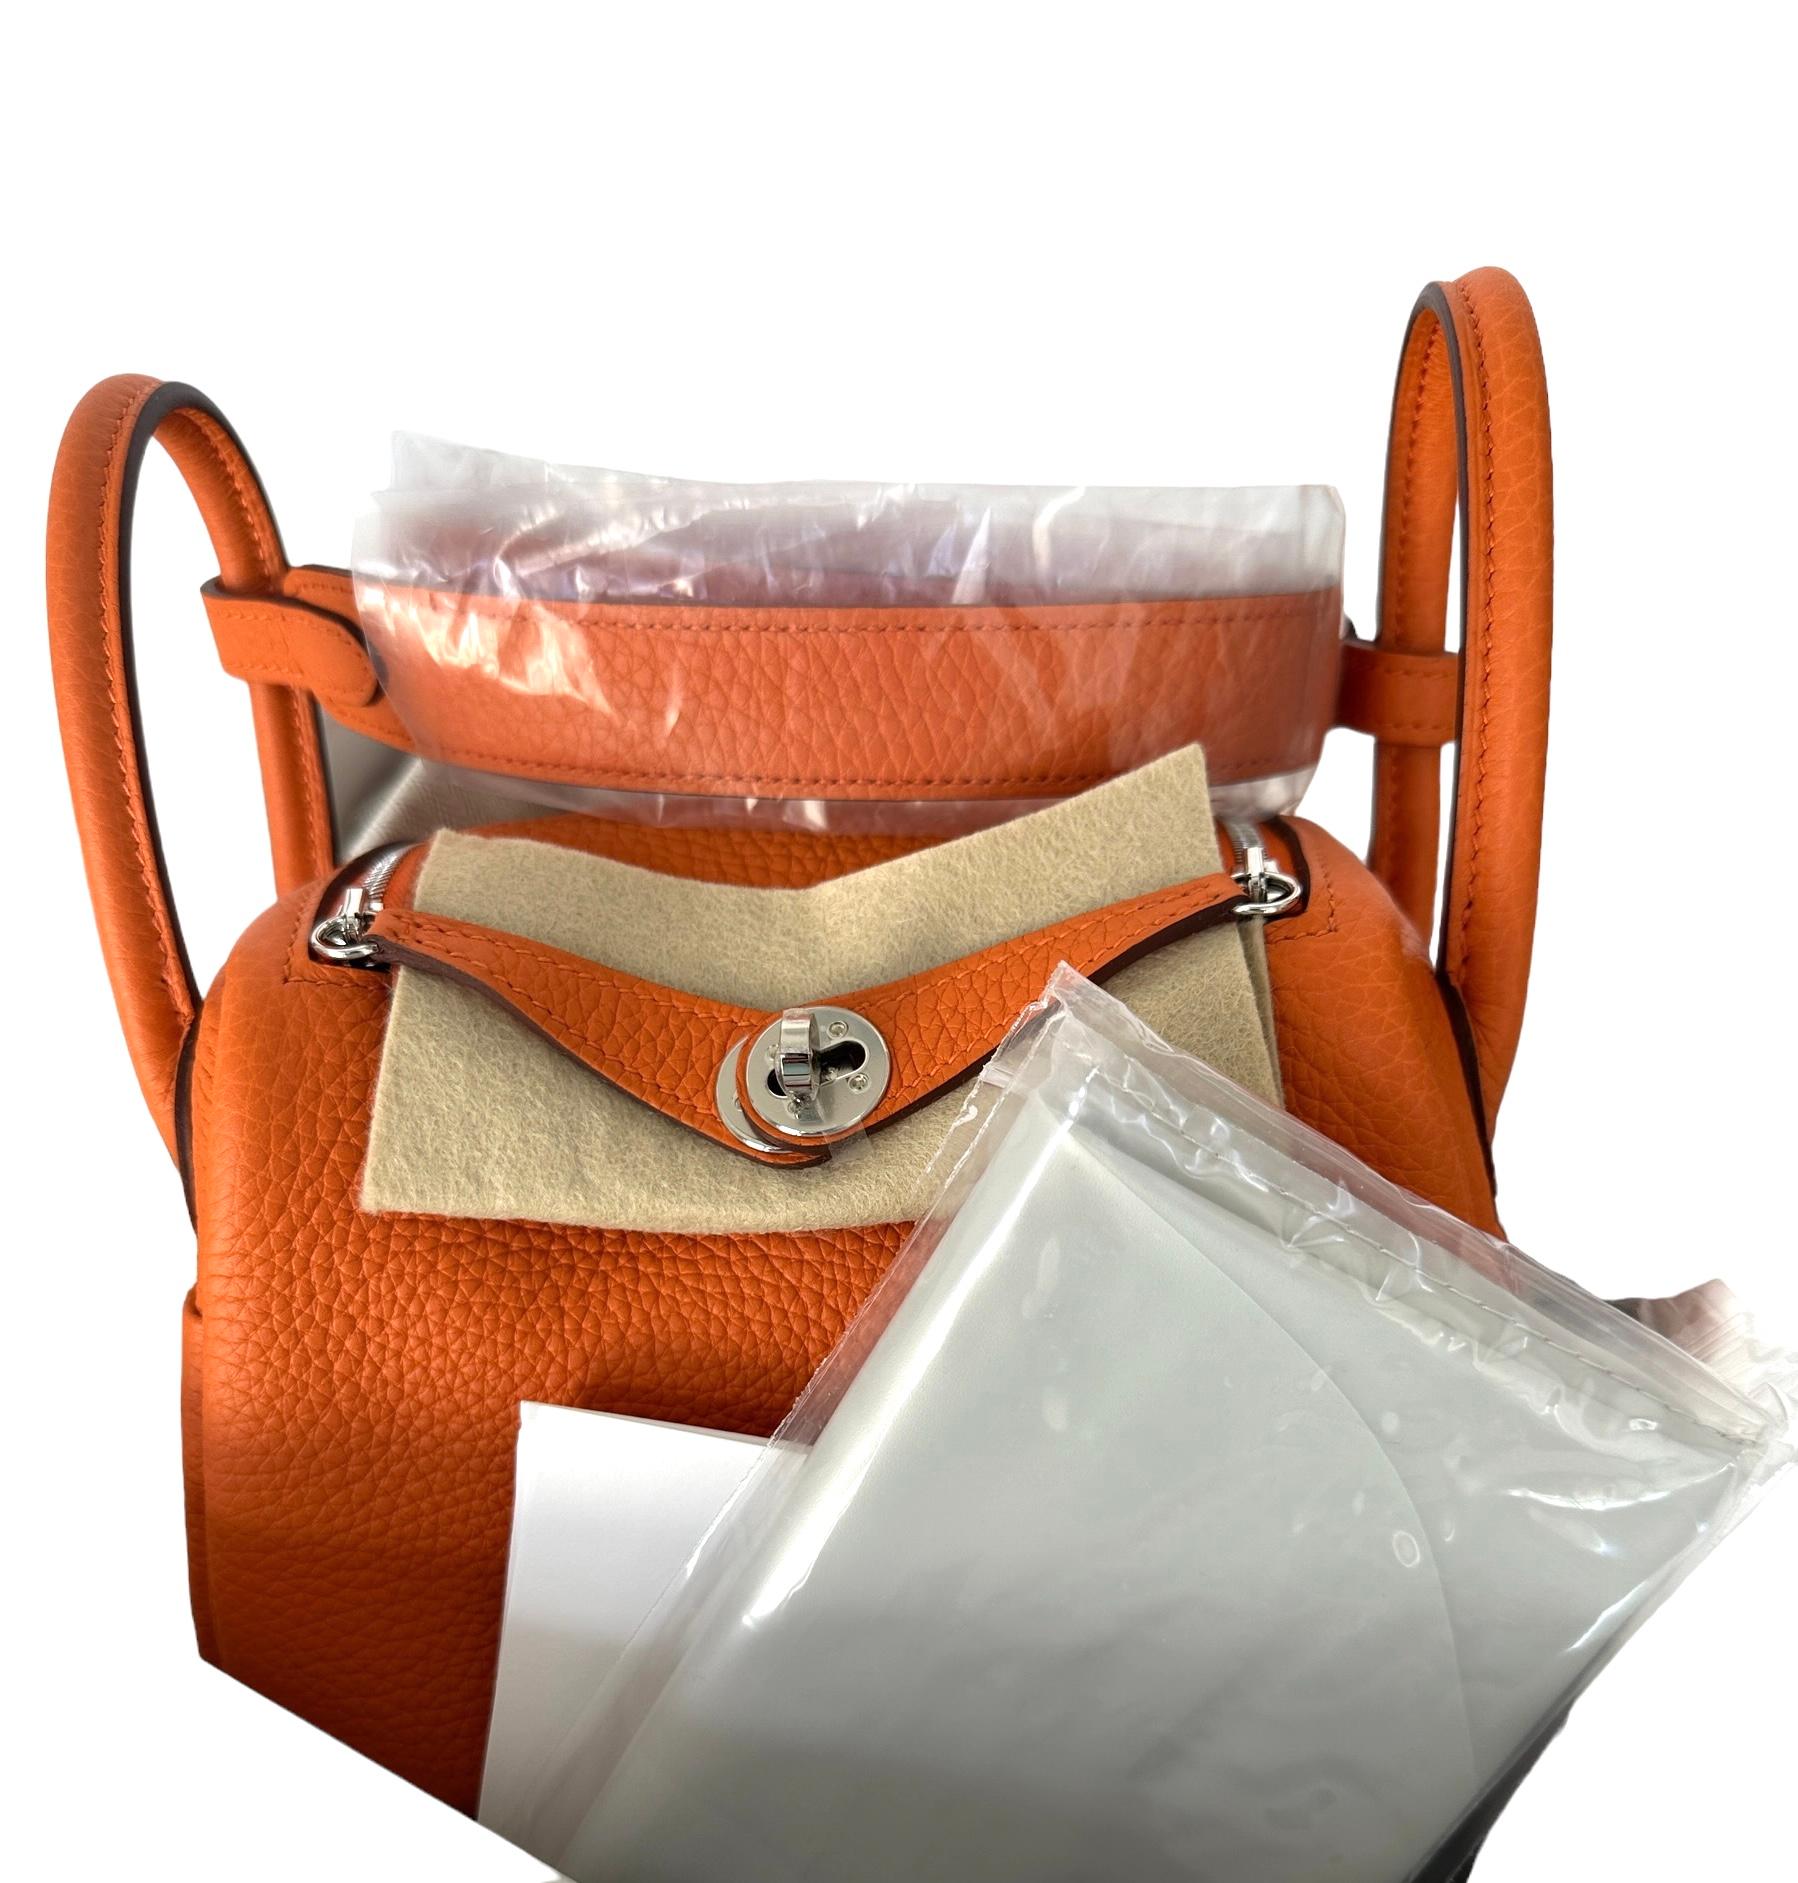 Hermes Lindy Bag
The New Size
The Mini
houlder or crossbody bag and is perfect for everyday use.

The Mini Lindy 20 is made of clemence leather and features two top handles, a detachable shoulder strap, and a top zipper closure. The bag also has two